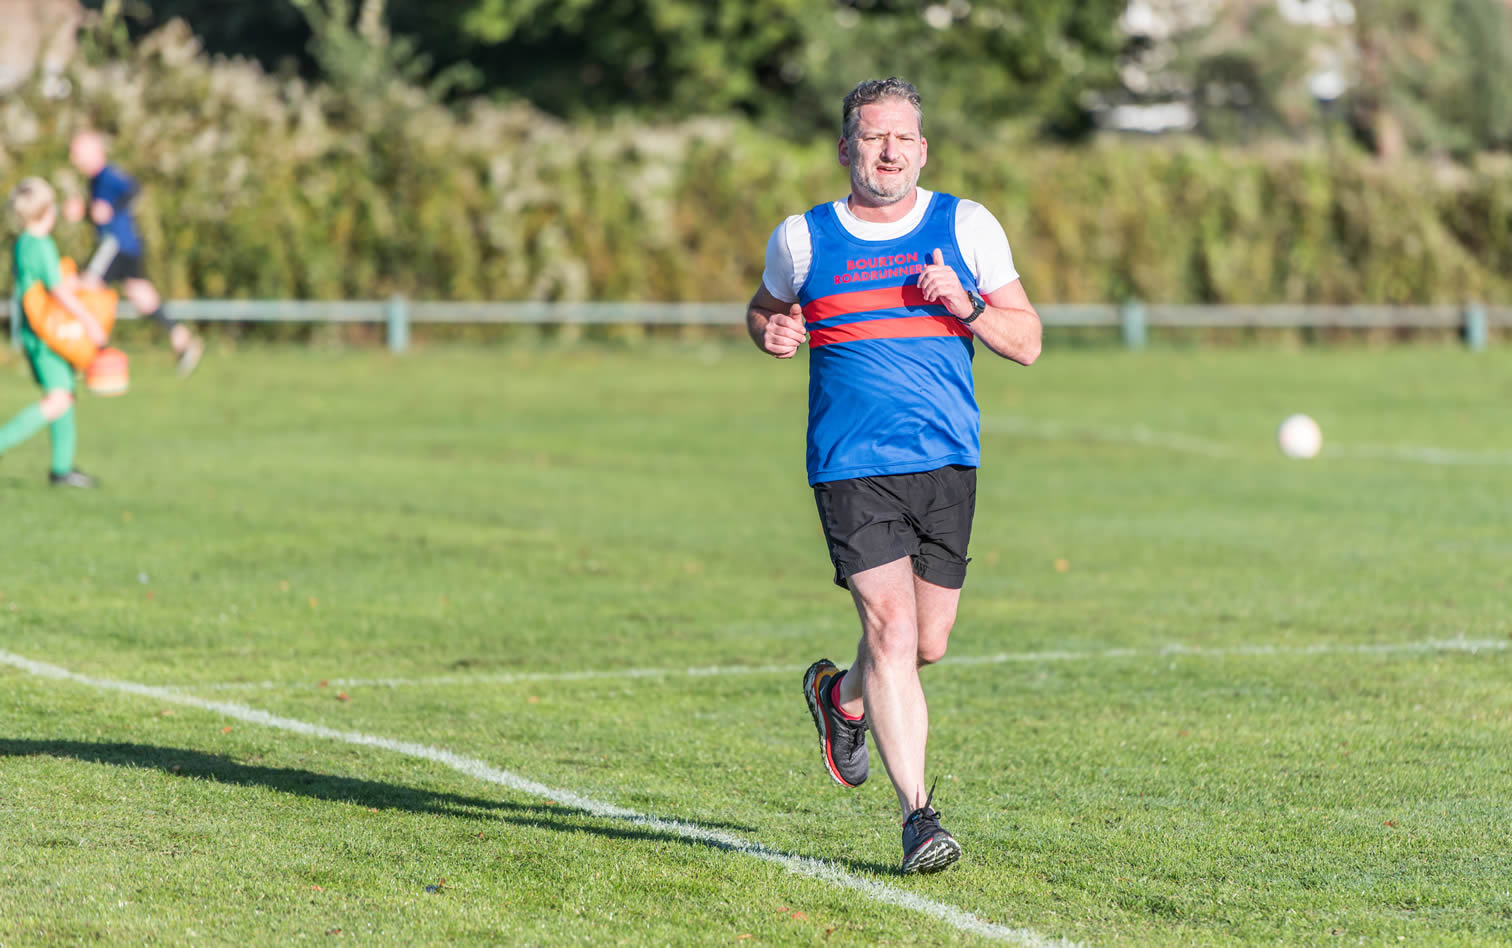 Bourton's Barry O'Leary at King George V Playing Field parkrun, Cheltenham - 8-10-2022